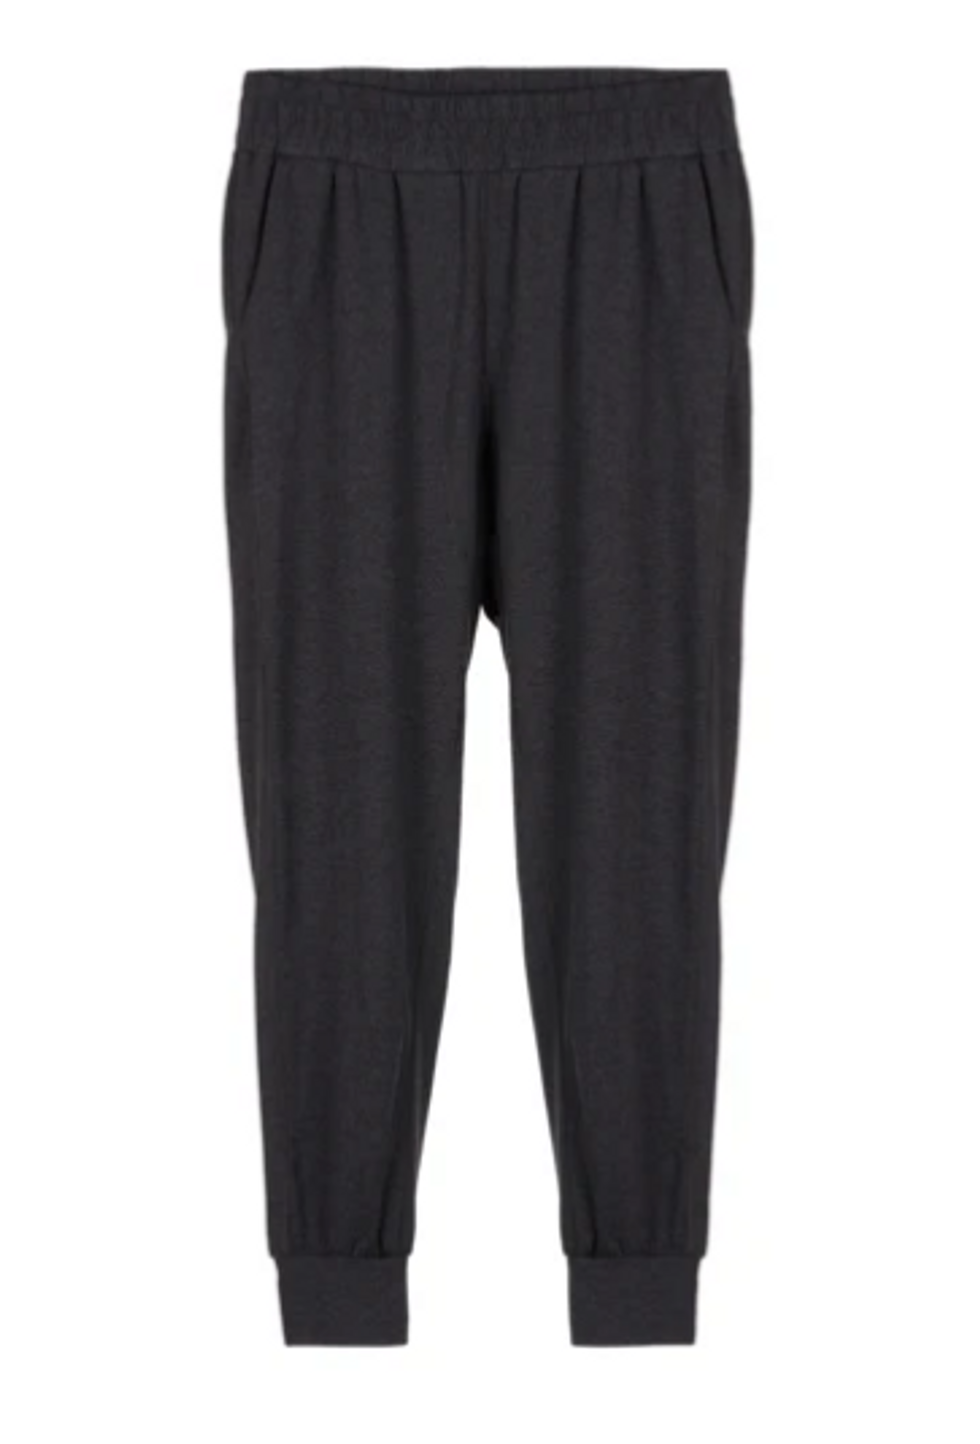 Anook Hayes Tall Joggers